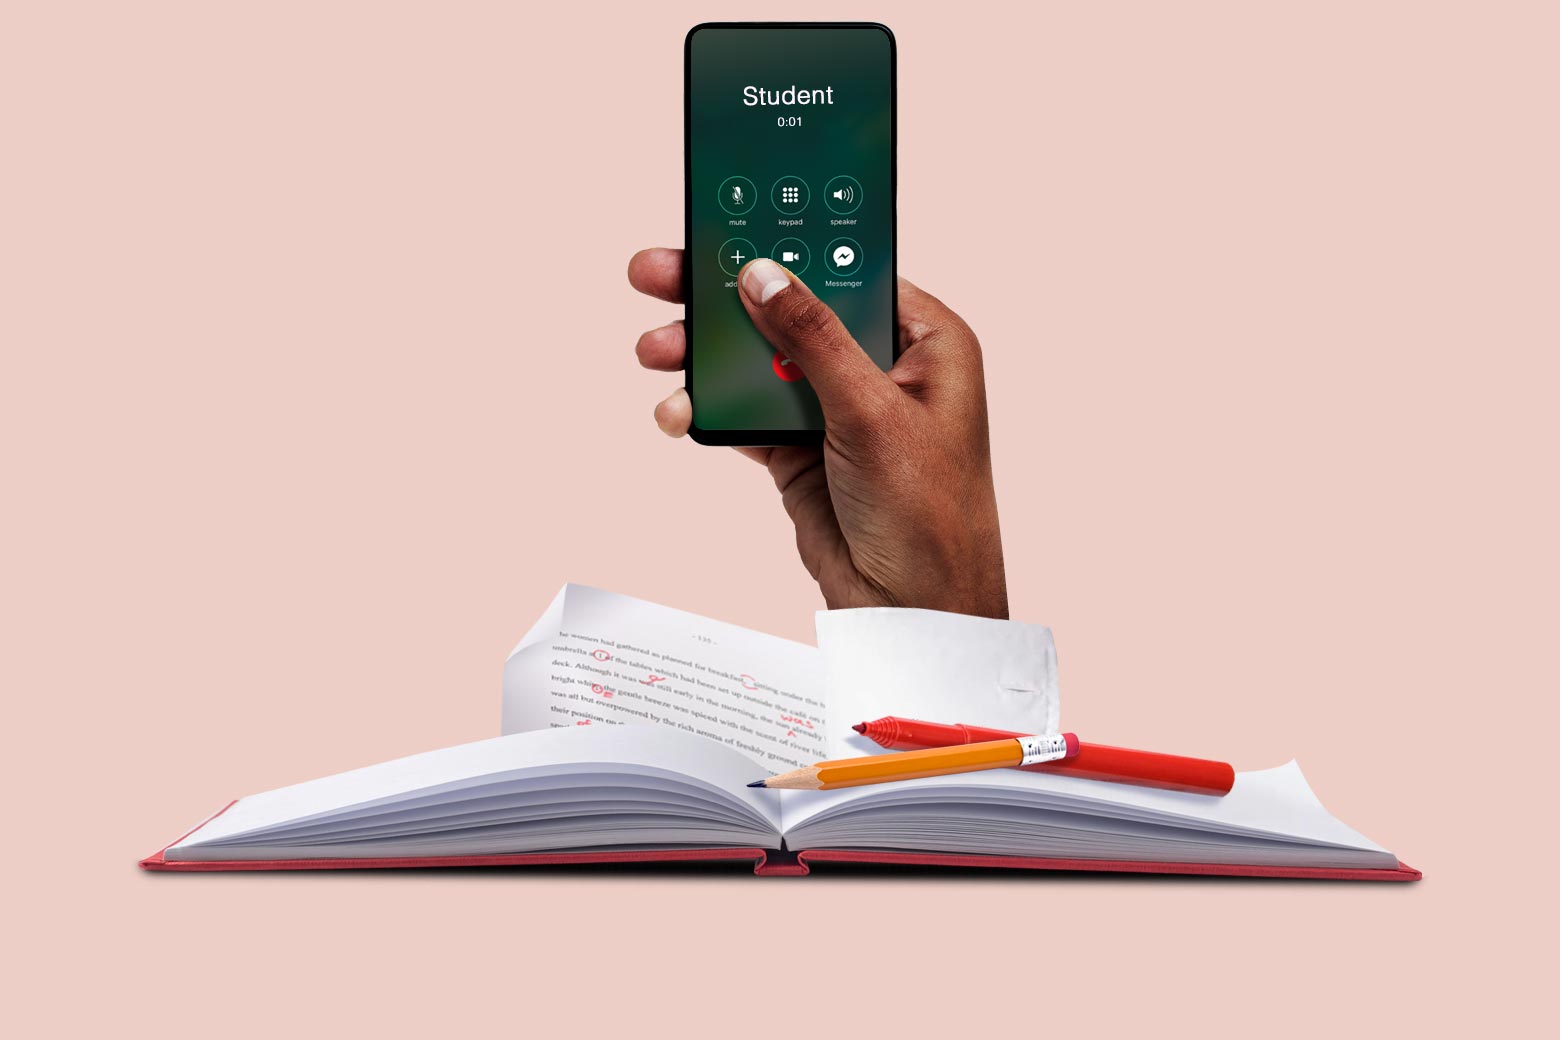 A hand reaches out of a book holding a cellphone on a call with "Student."